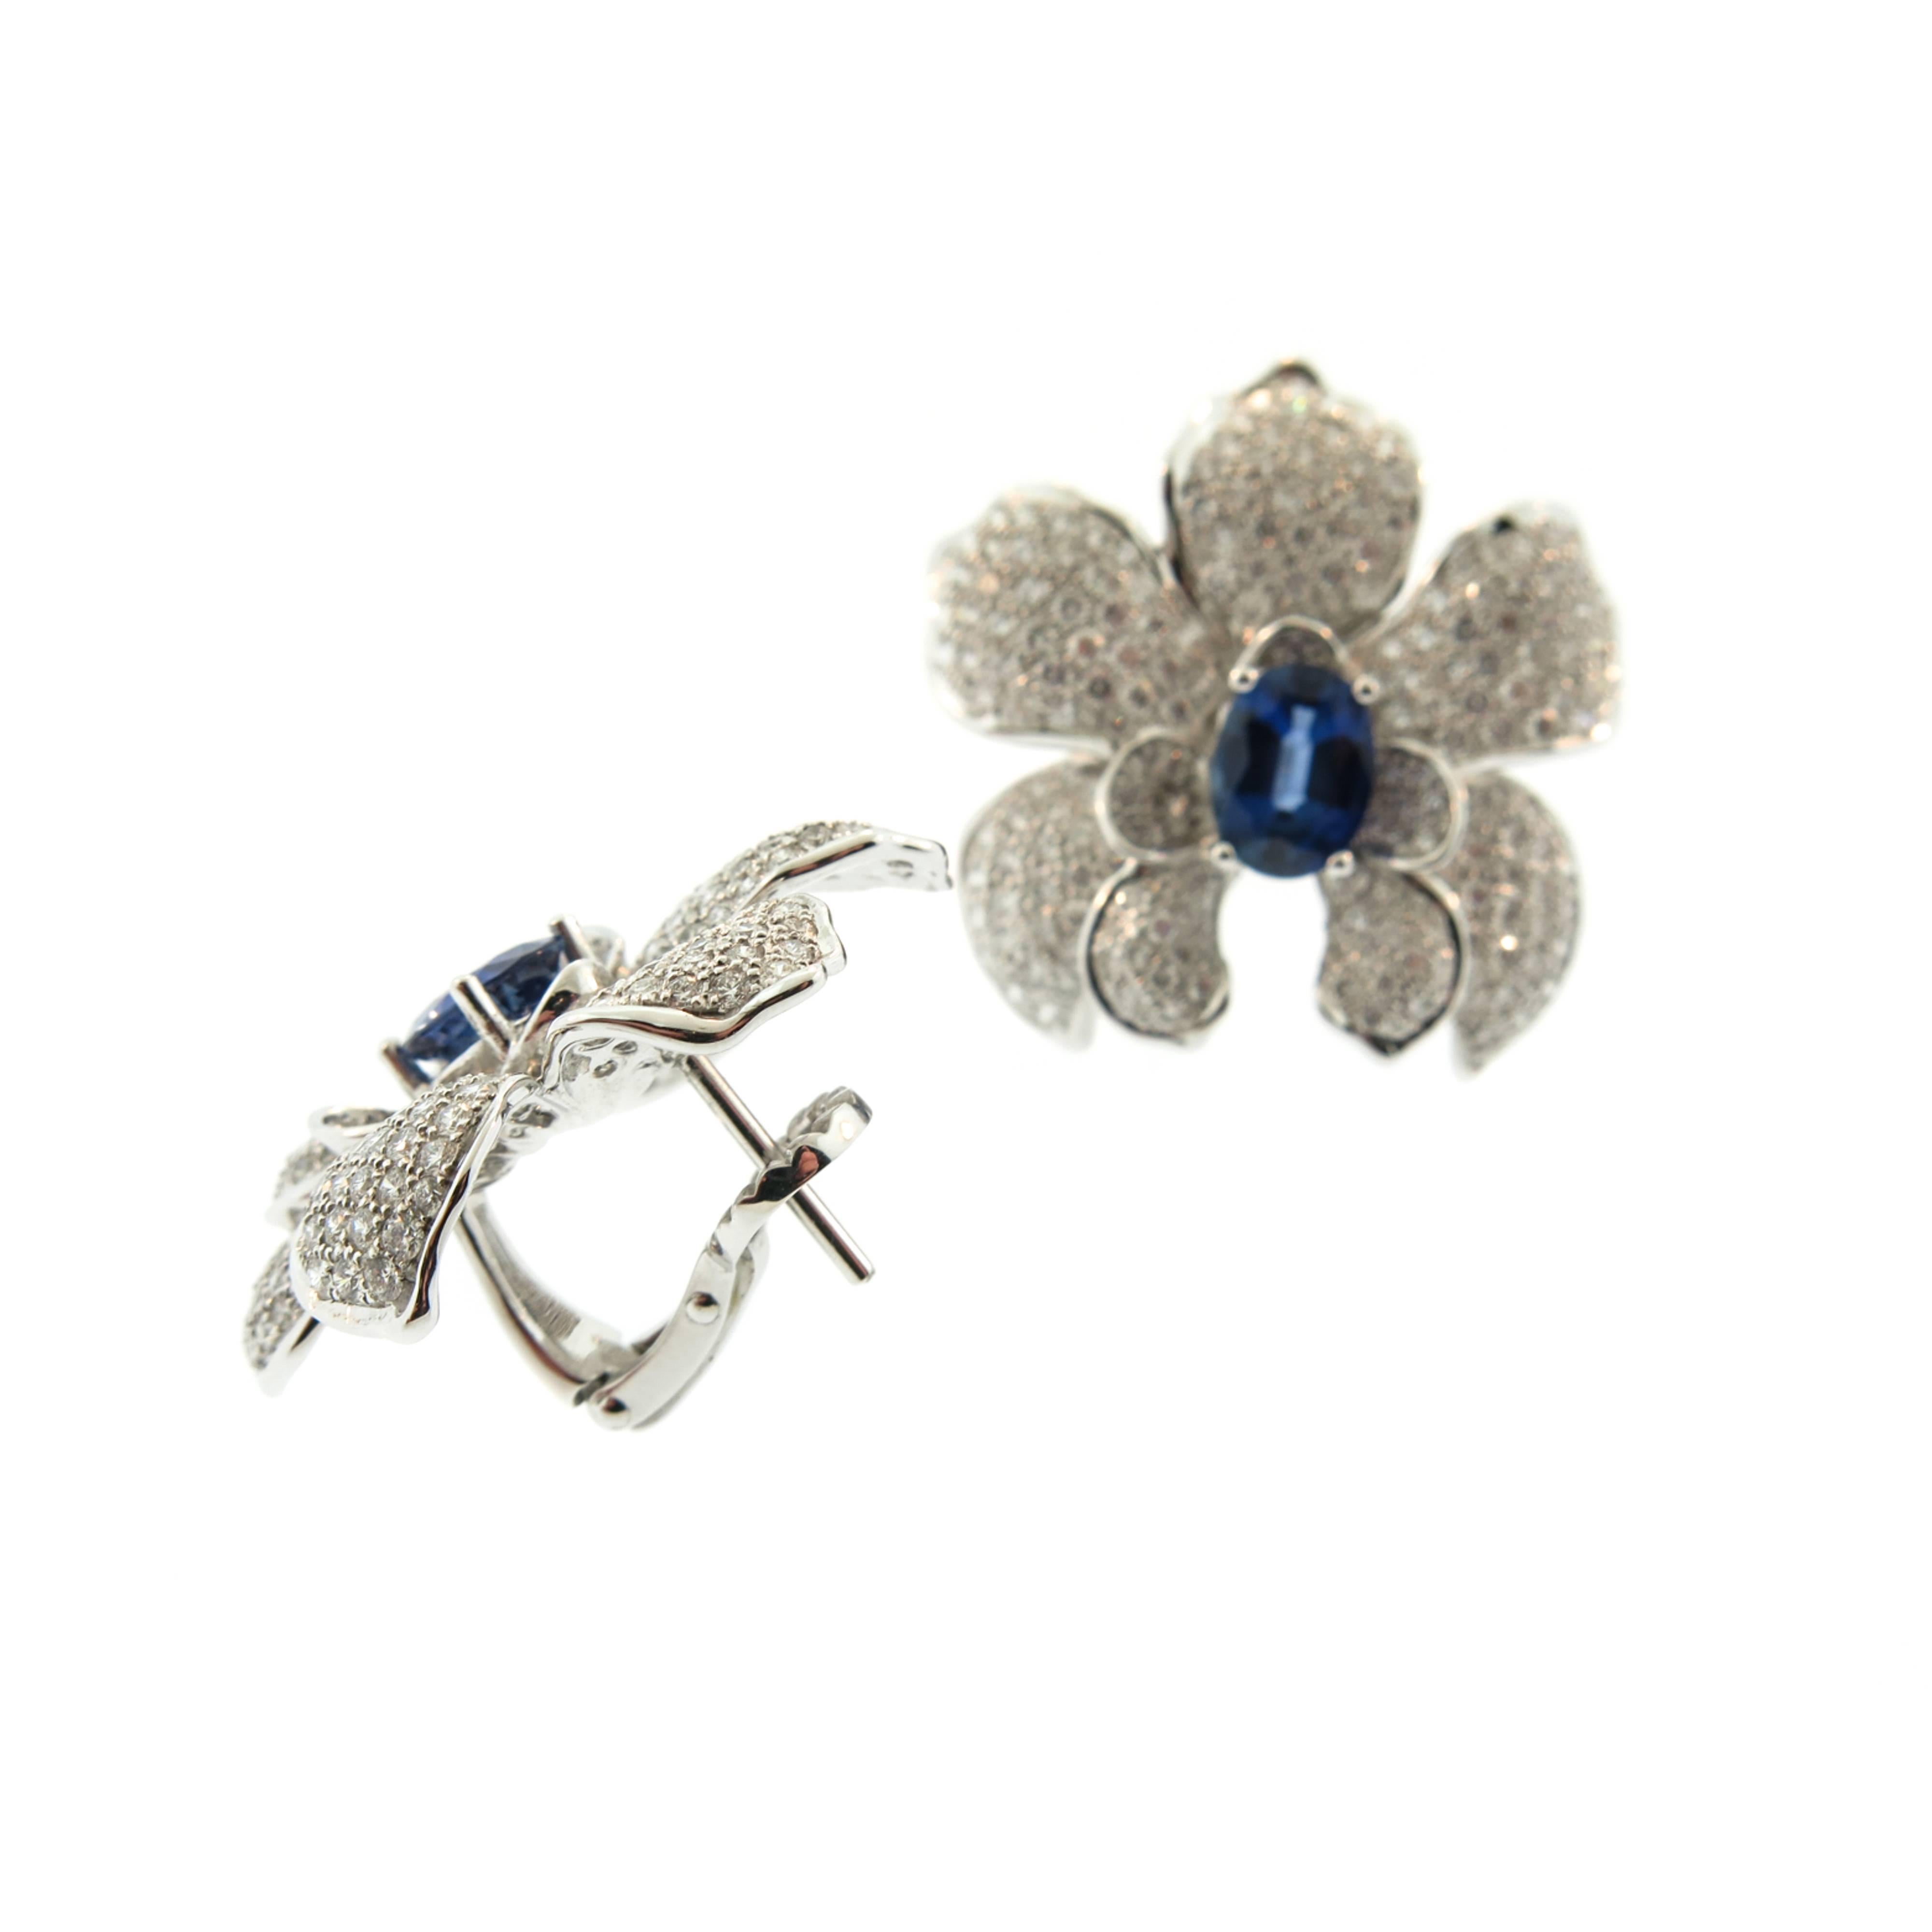 Extraordinary Orchid Earrings, this flower communicates sensuality, in its sophisticated finish, sculptural shape, and overflowing glamour. 
Created by Carrera y Carrera in 18k white gold with 408 white diamonds (3.70 ct.) and
 2.81 ct. sapphires